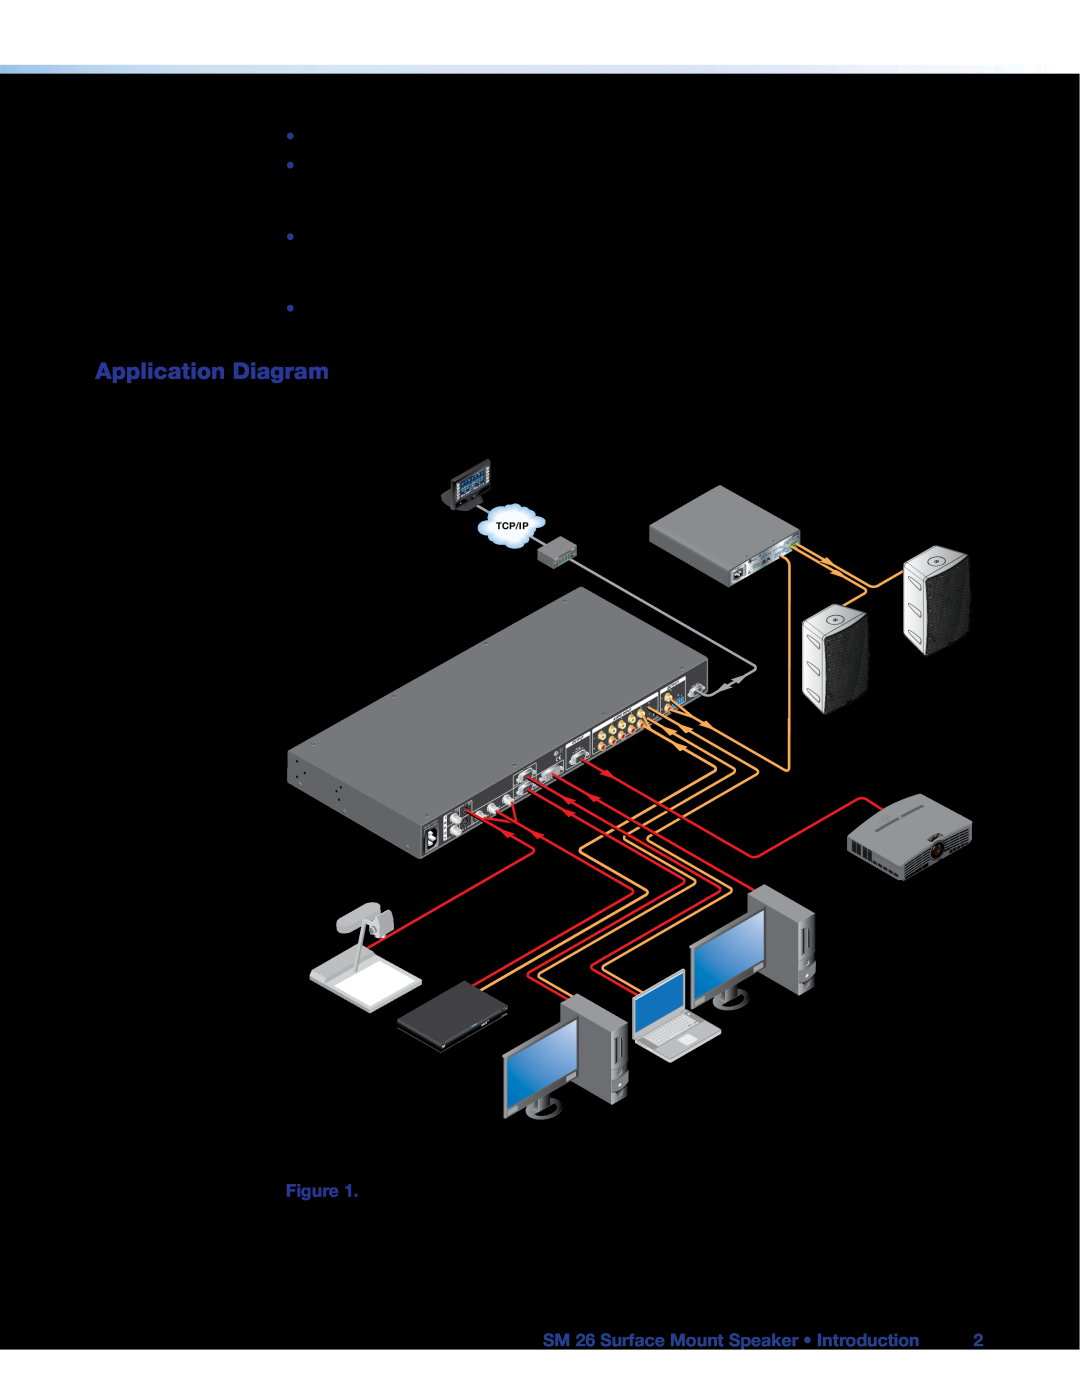 Extron electronic manual Application Diagram, SM 26 Surface Mount Speaker Introduction 